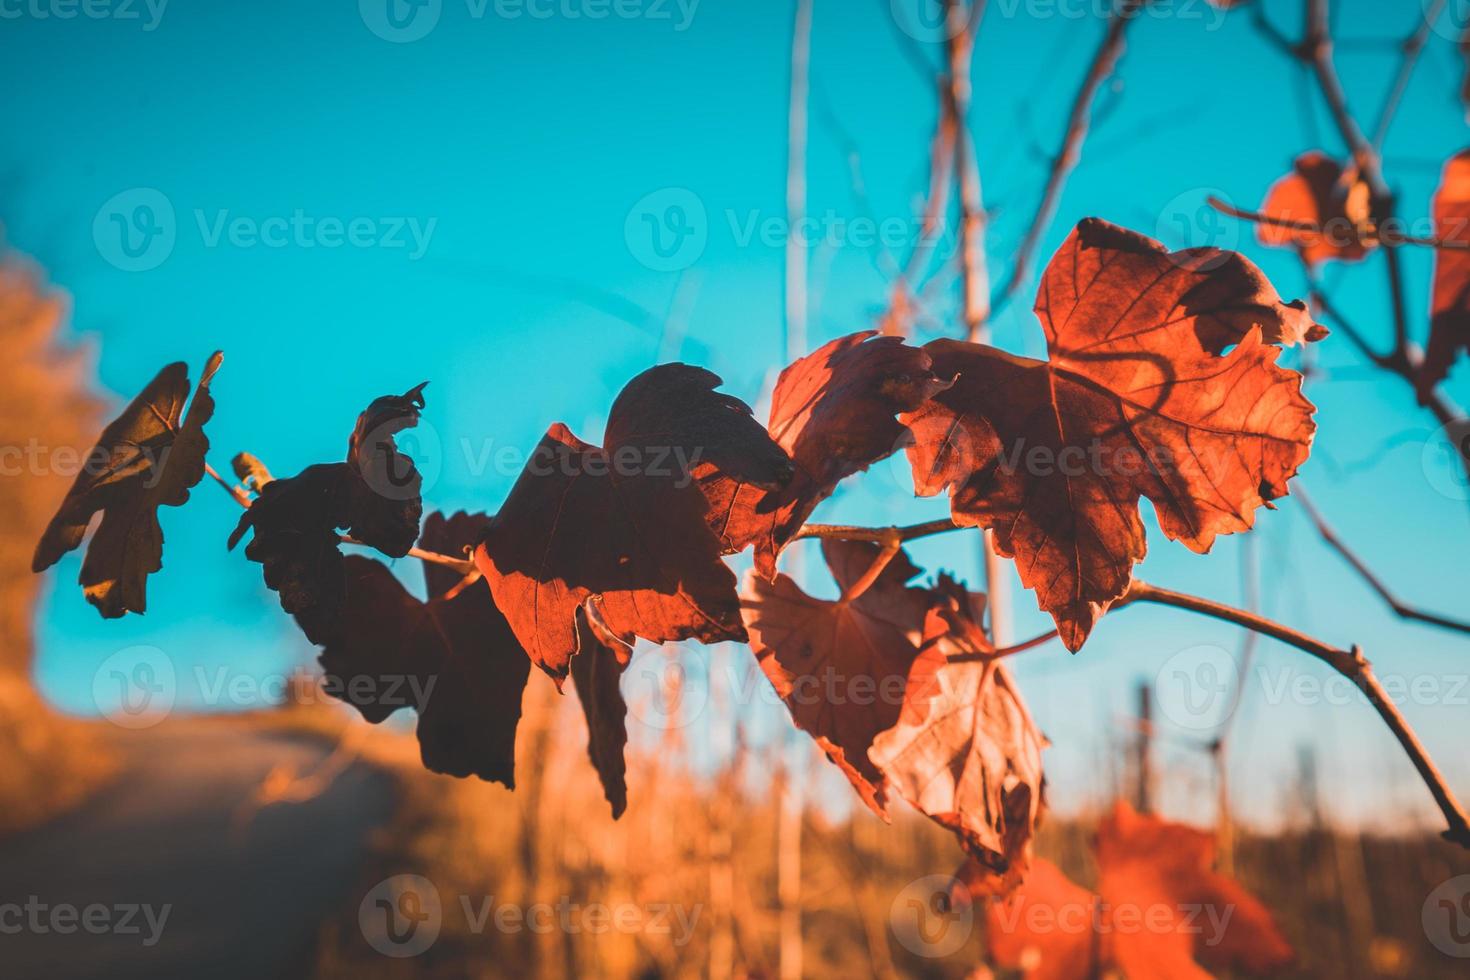 Autumn orange and red leaves photo